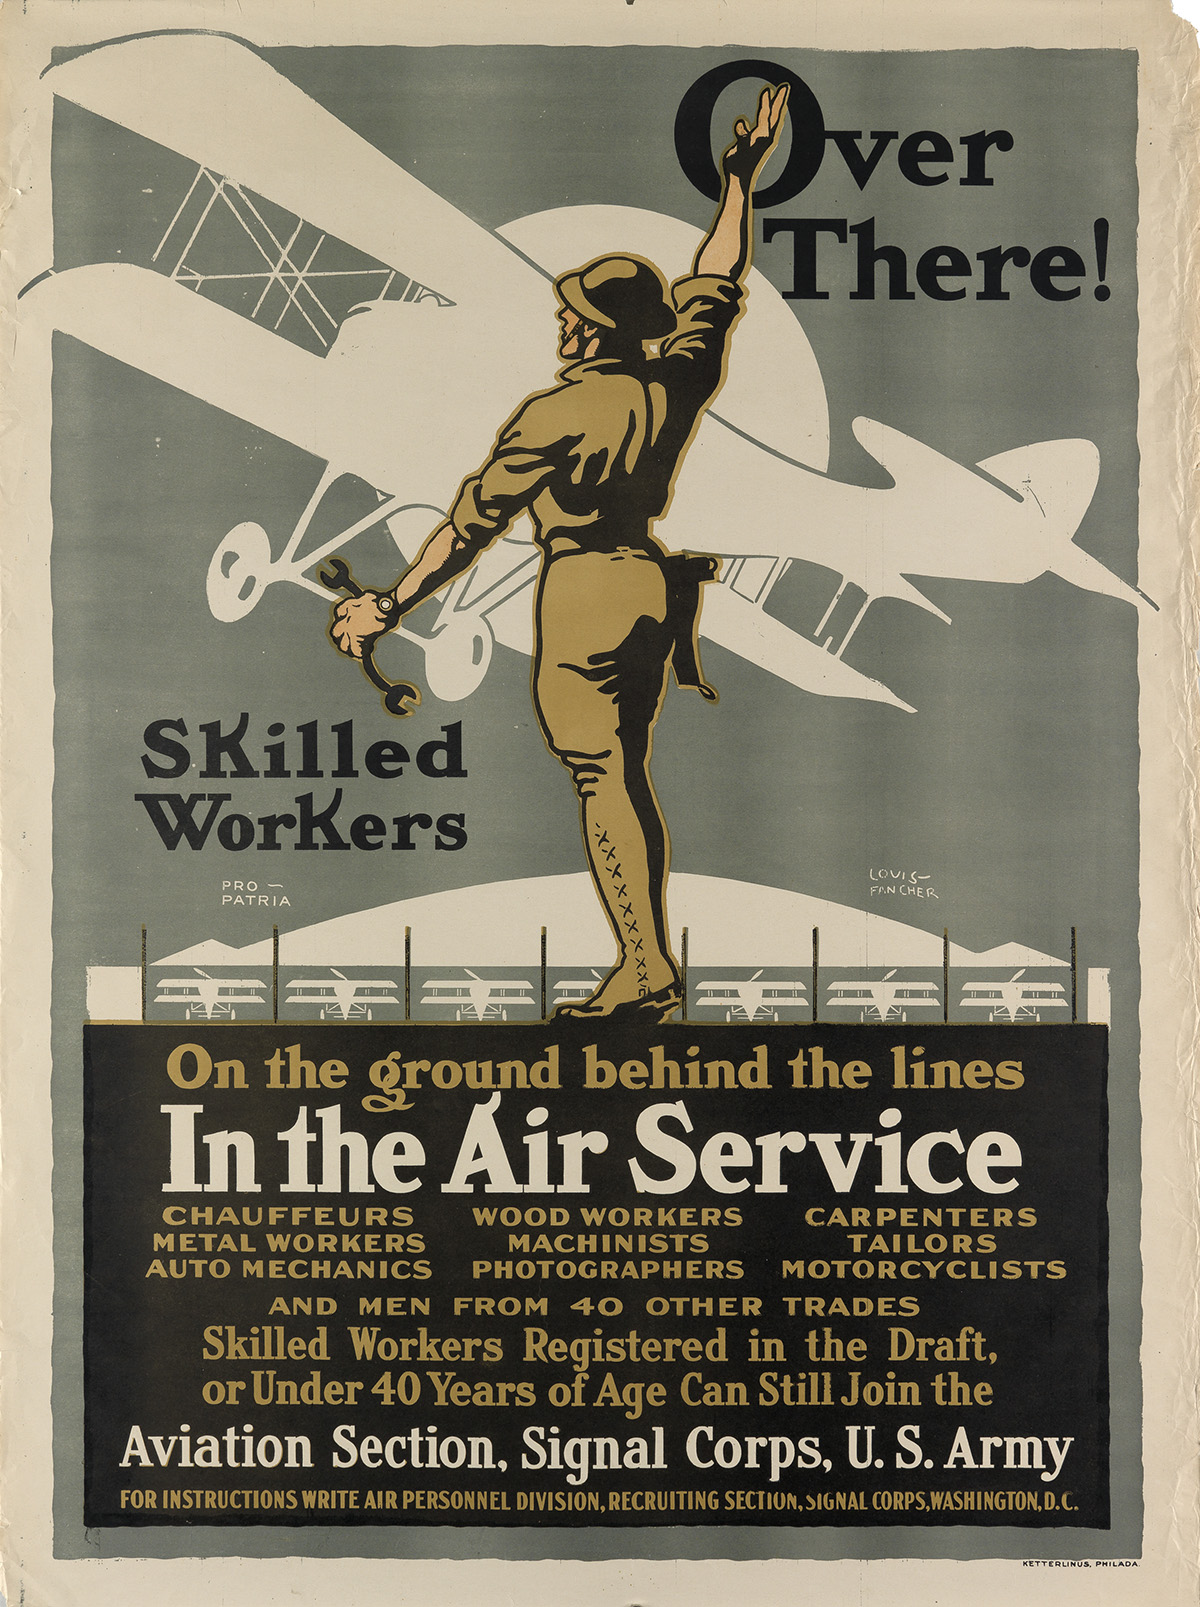 LOUIS FANCHER (1884-1944). OVER THERE! / IN THE AIR SERVICE. Circa 1918. 40x30 inches, 101x76 cm. Ketterlinus, Philadelphia.